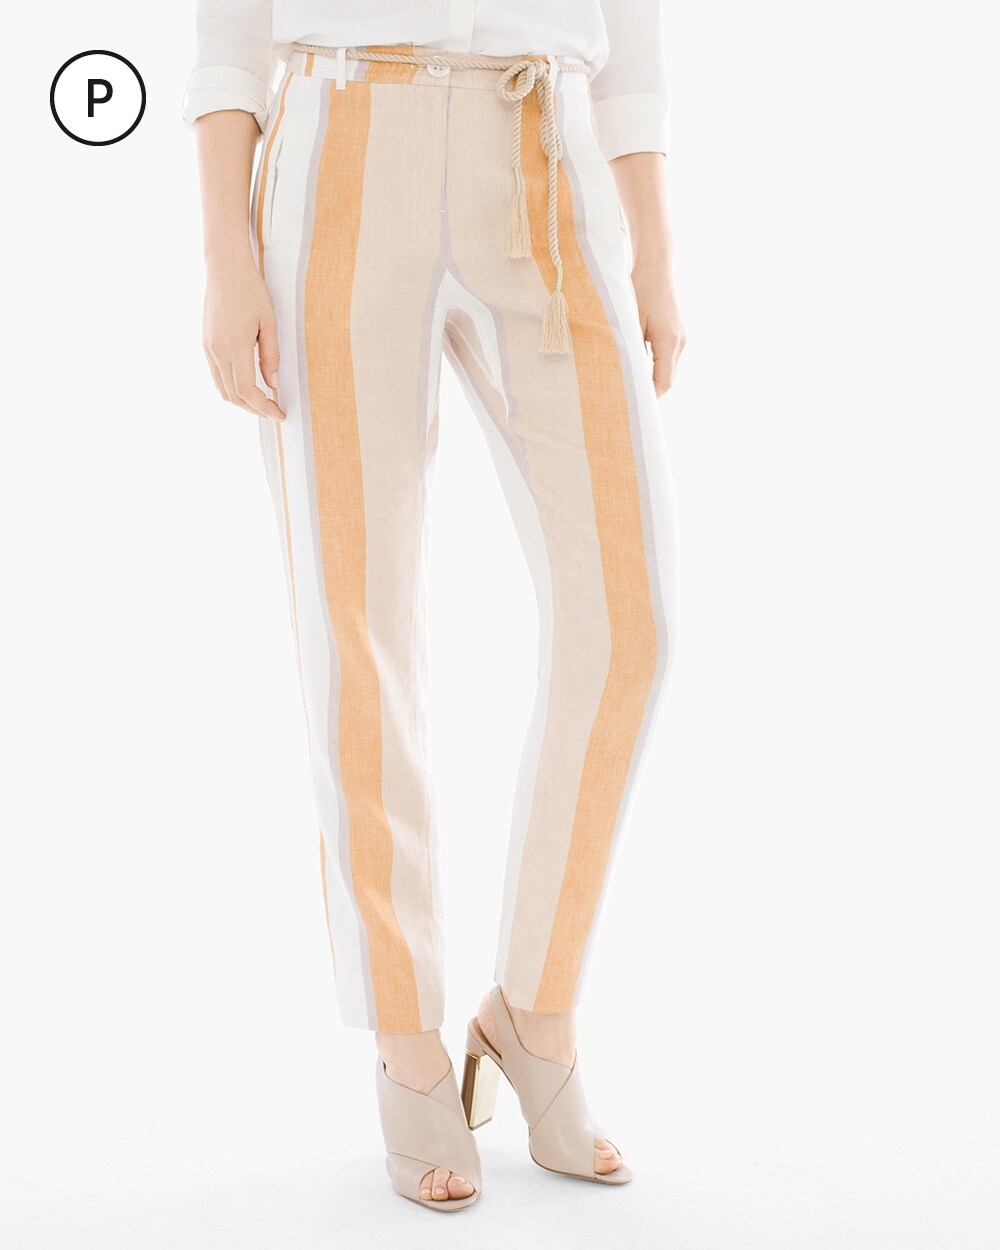 Petite Striped Tapered Ankle Pants